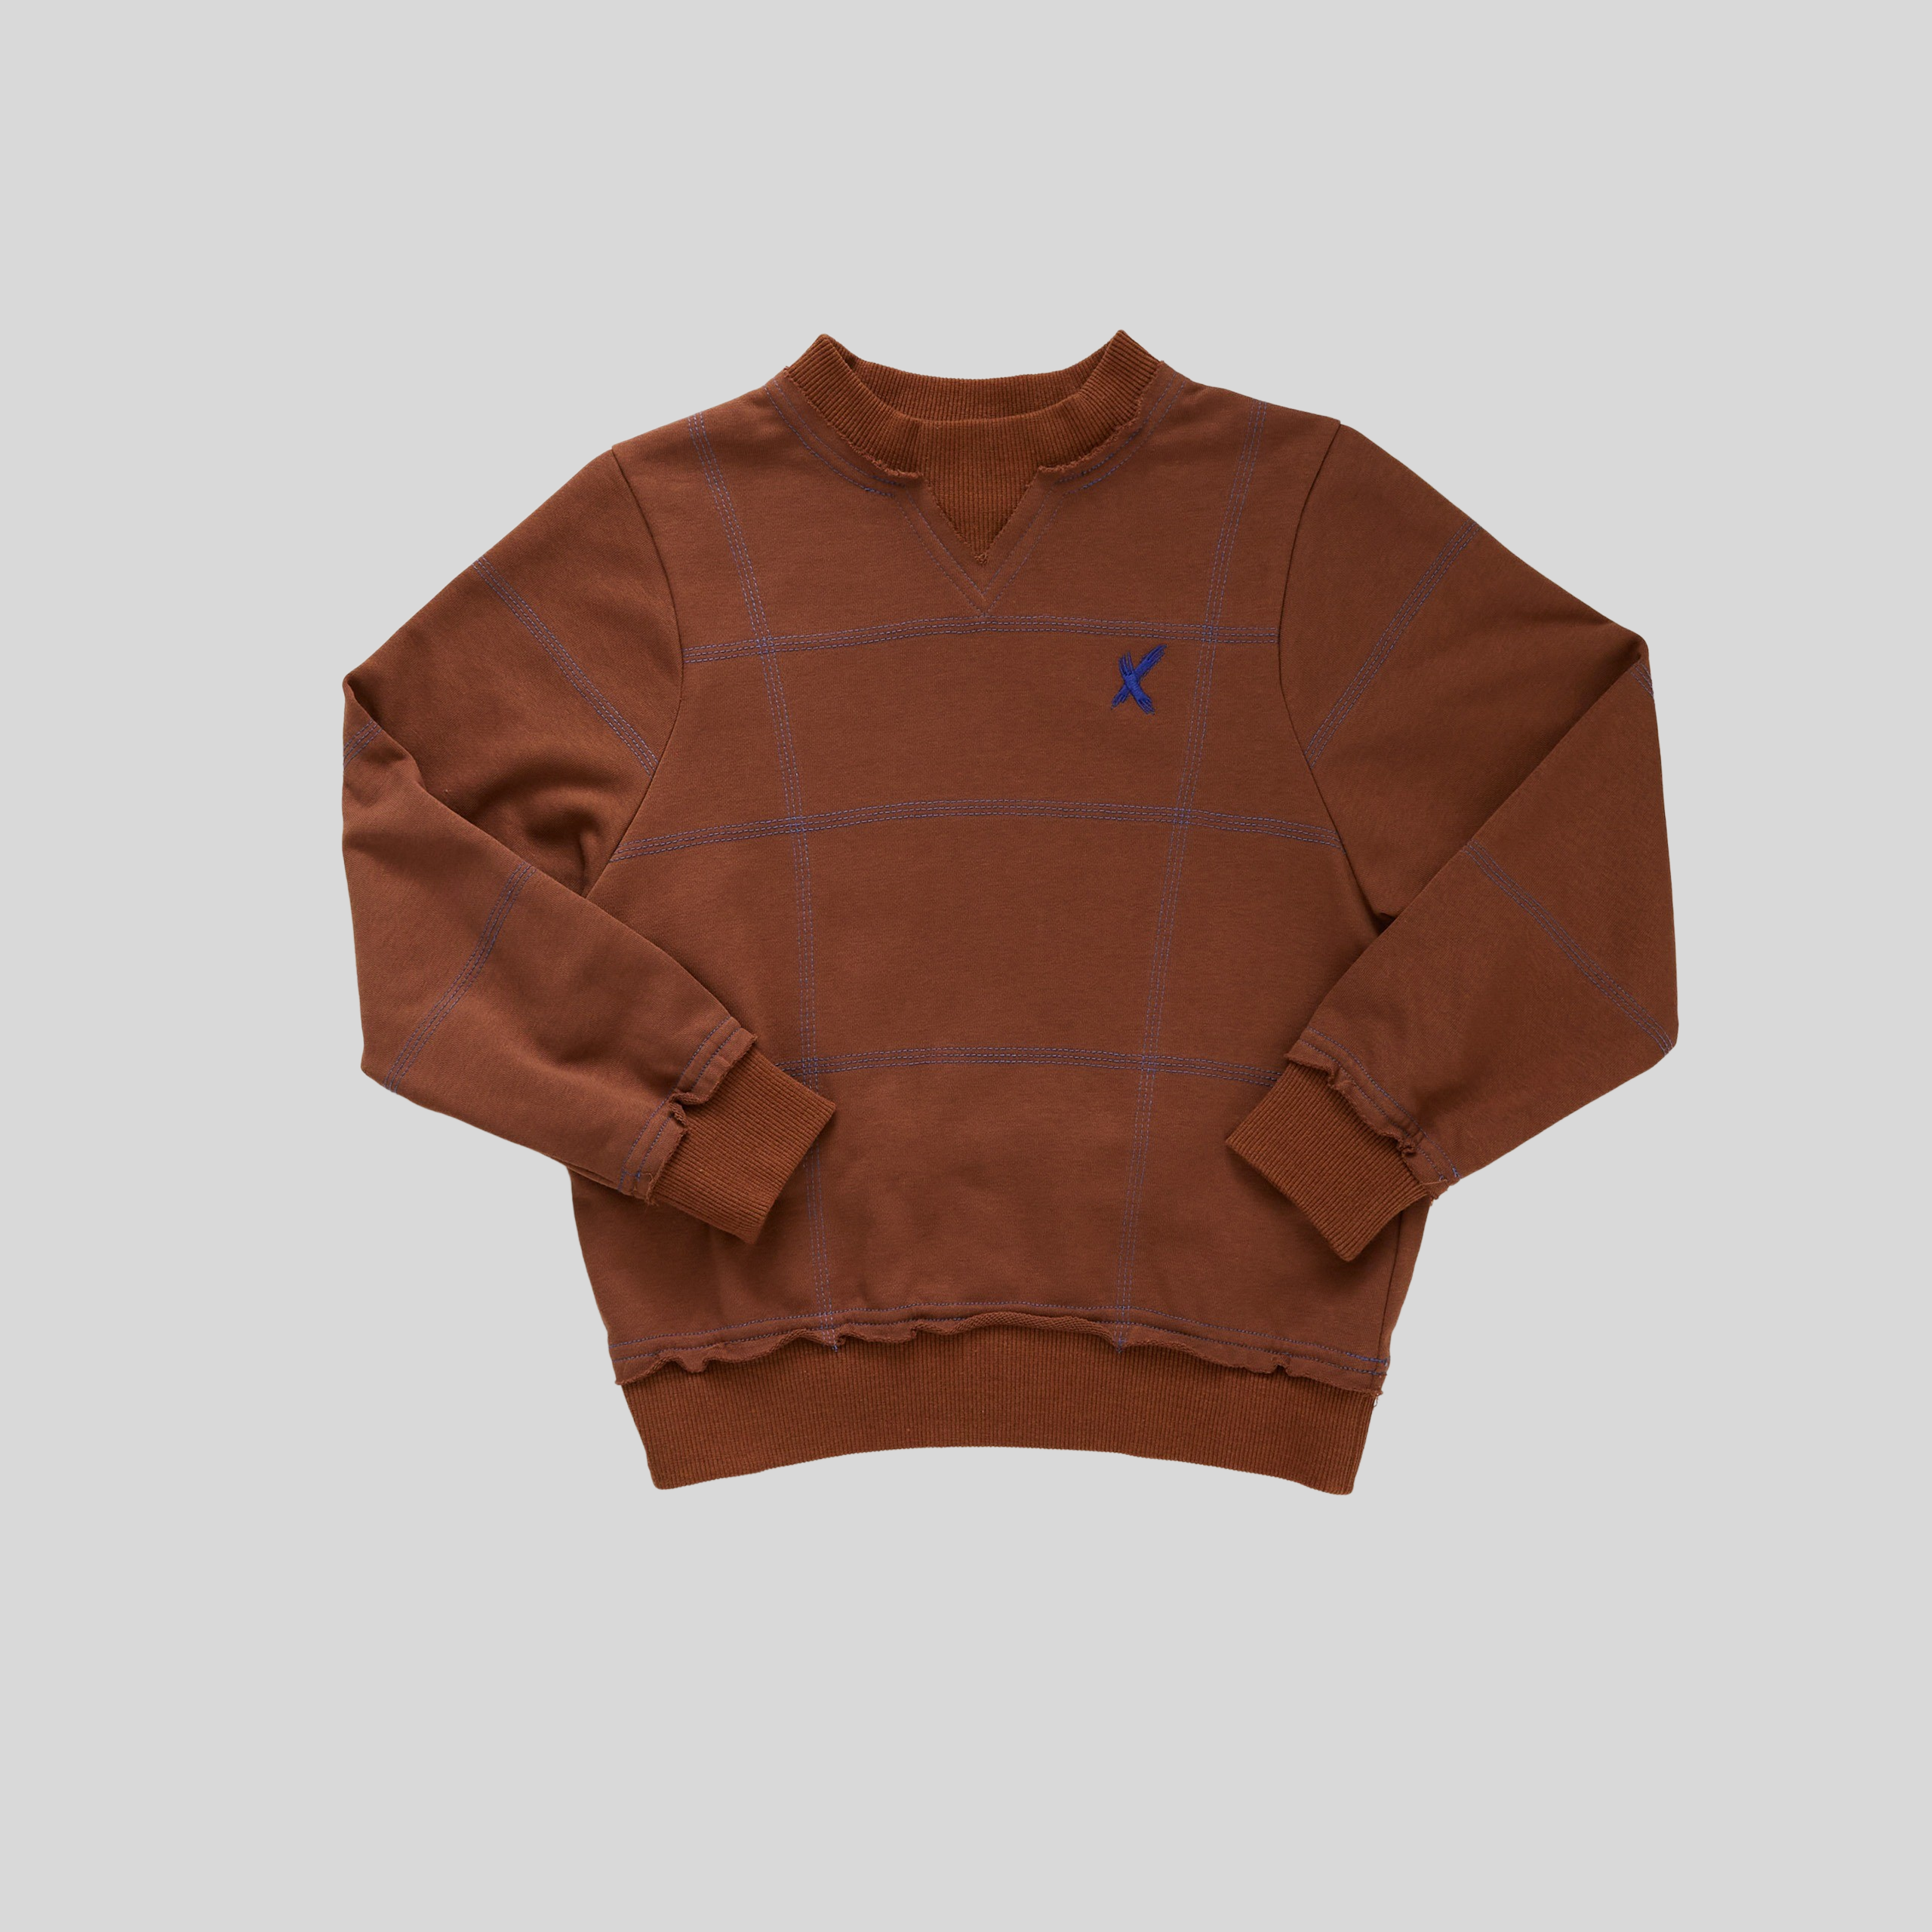 Hey Kid Stitched Top - Brown